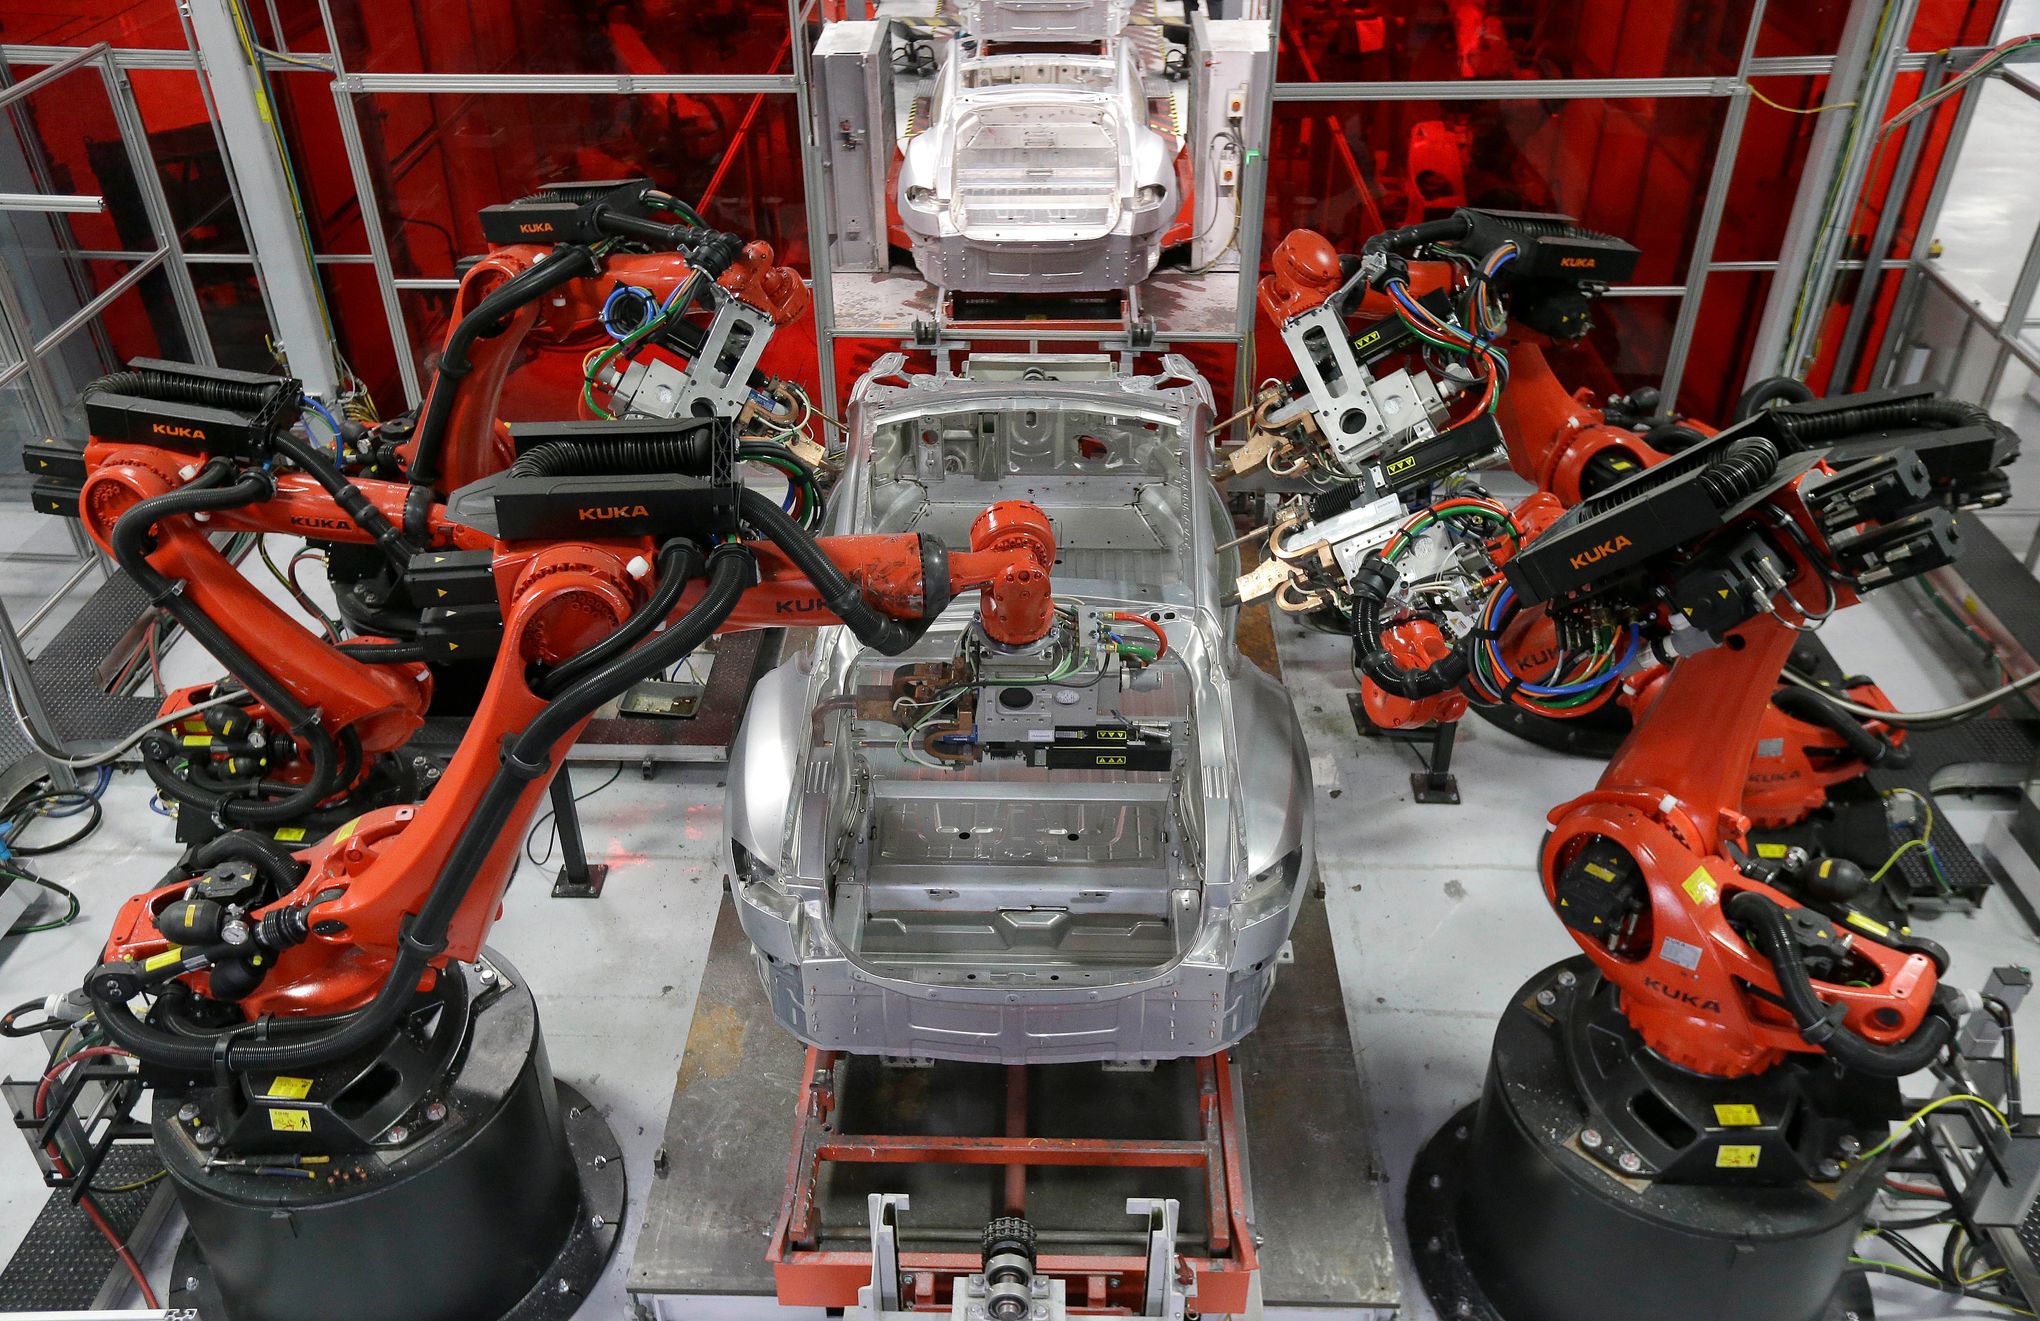 Tesla's Highly Anticipated Model 3 Just Entered 'Production Hell